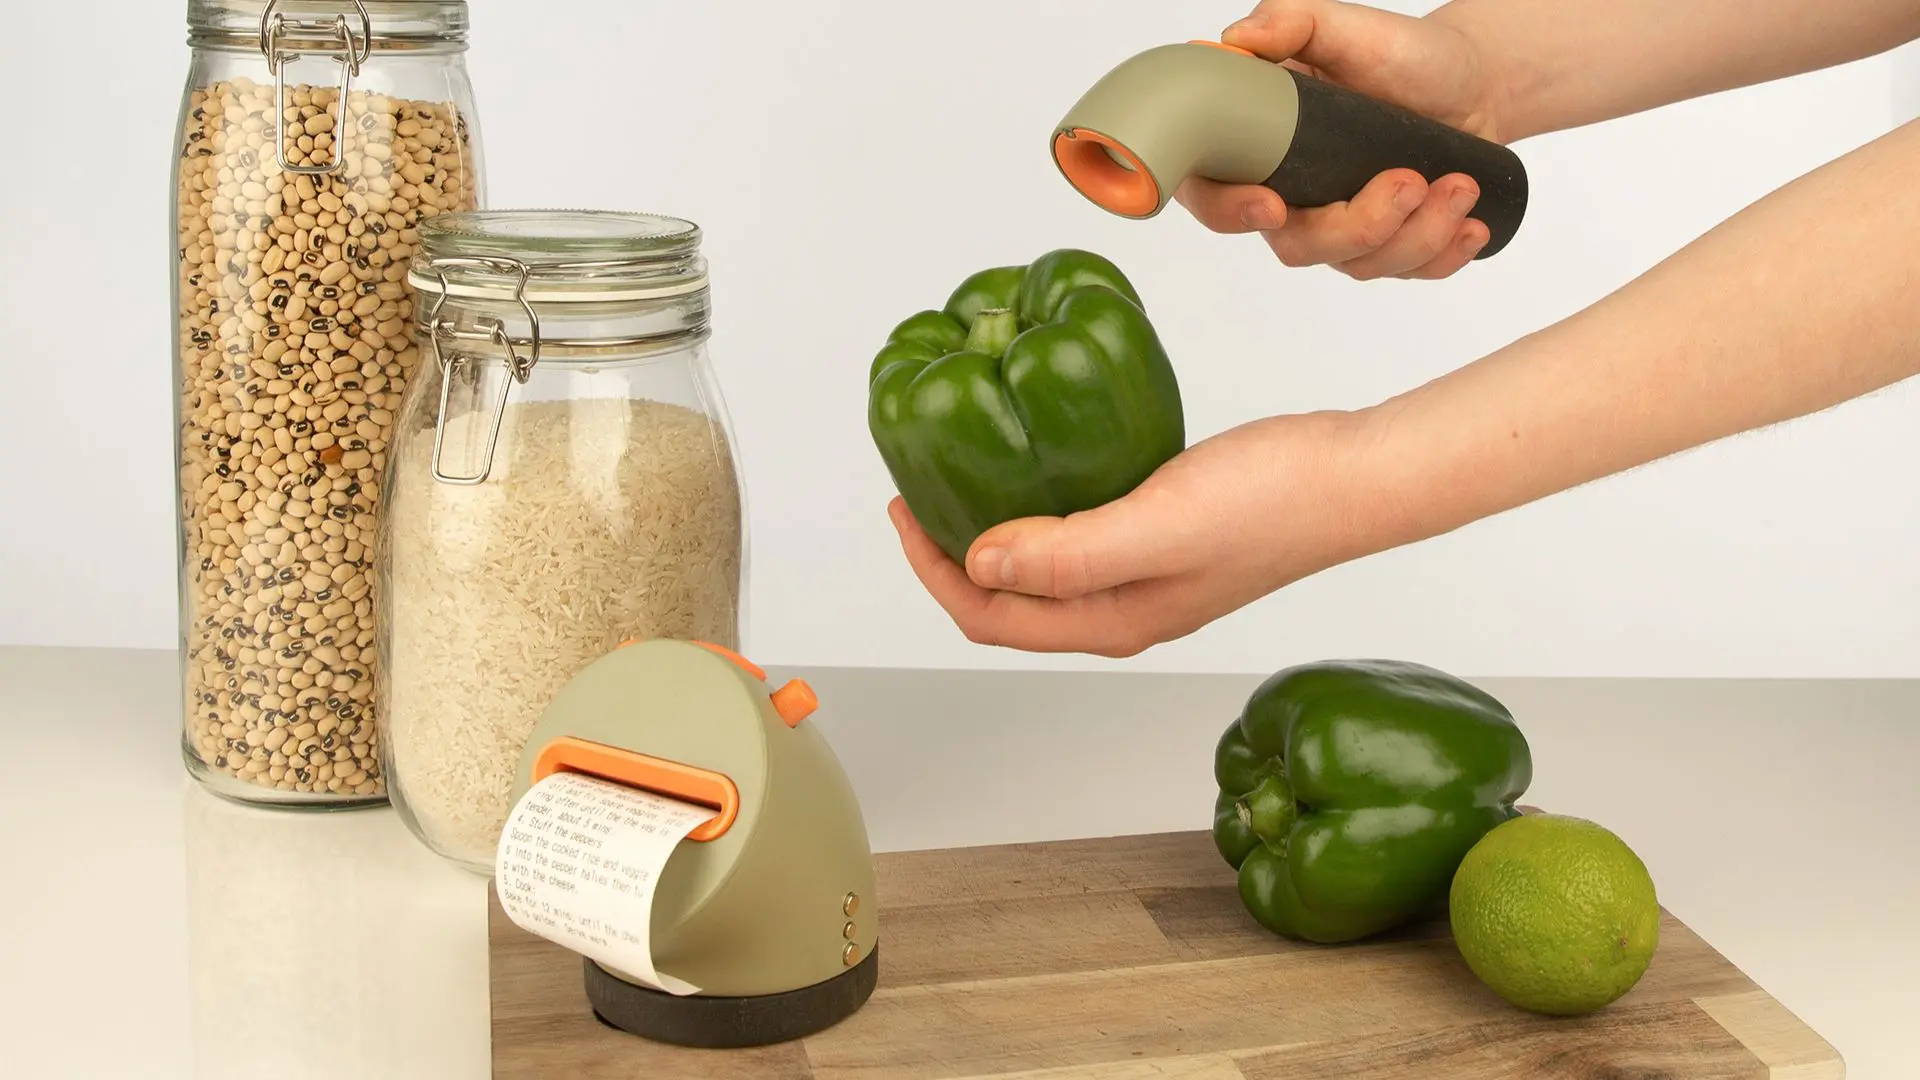 Unique eco-friendly kitchen products for a sustainable future